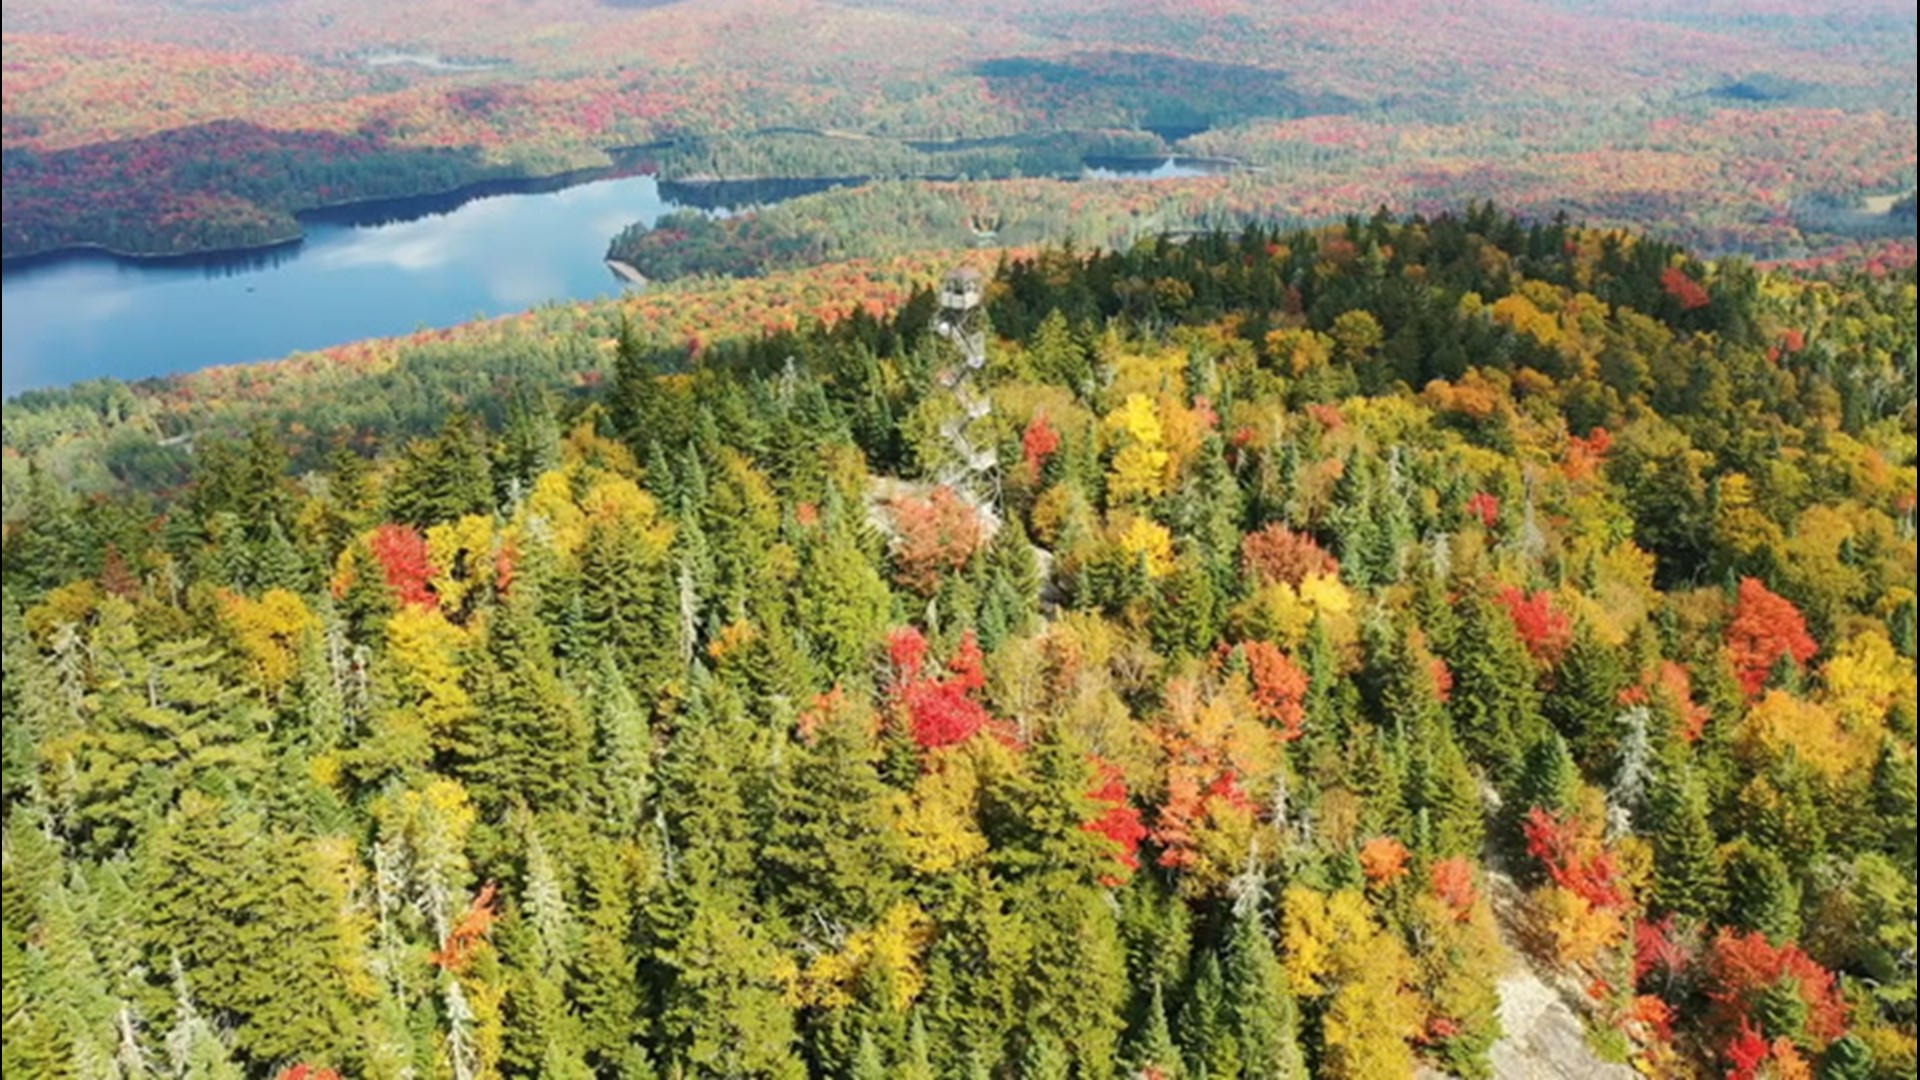 A drone captured breathtaking views of fall colors when it flew over Newcomb, New York, on Sept. 25.